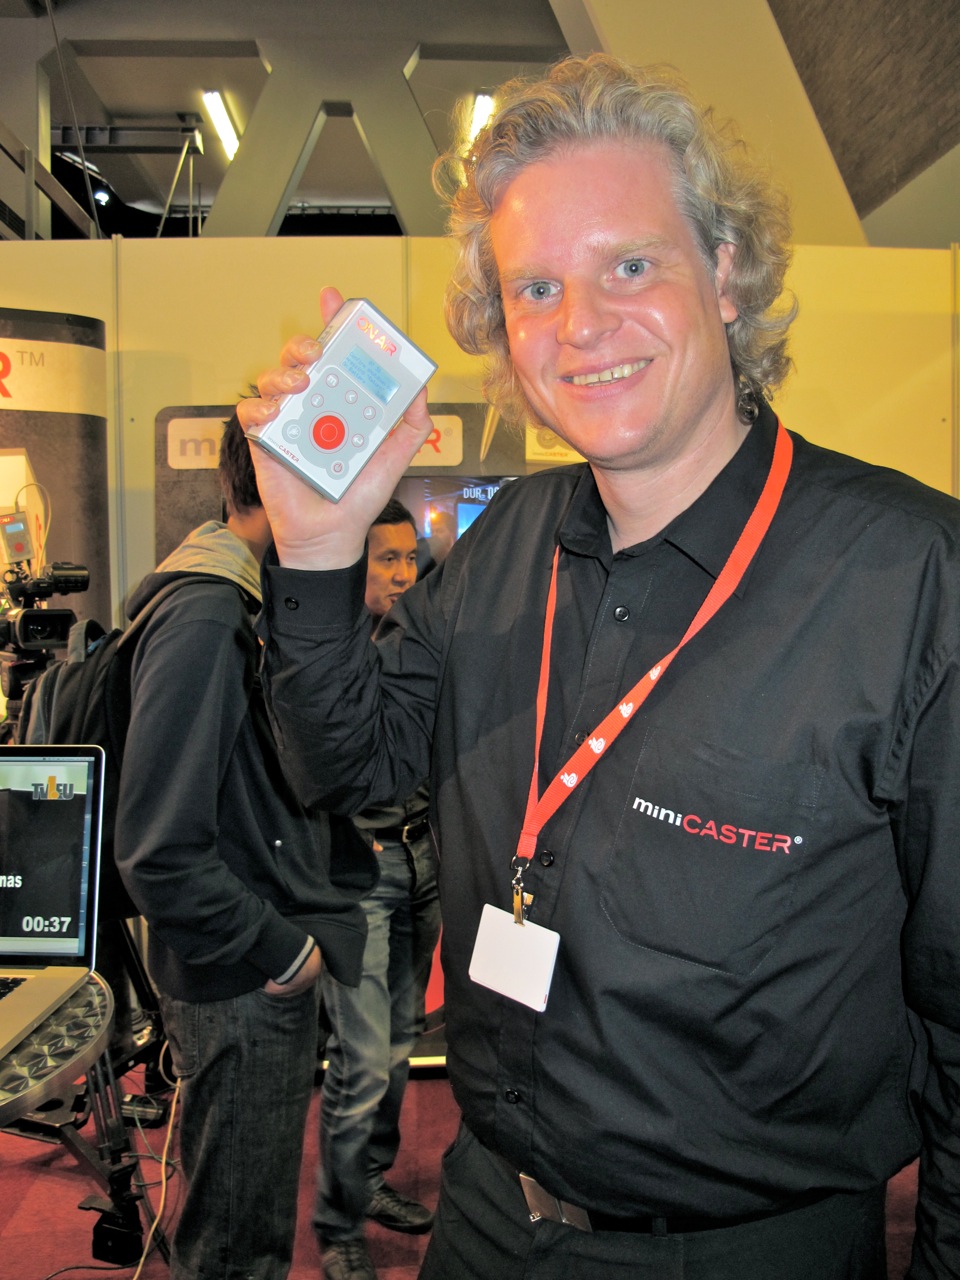 TV1.EU's Michael Westphal showing off the brand-new miniCASTER